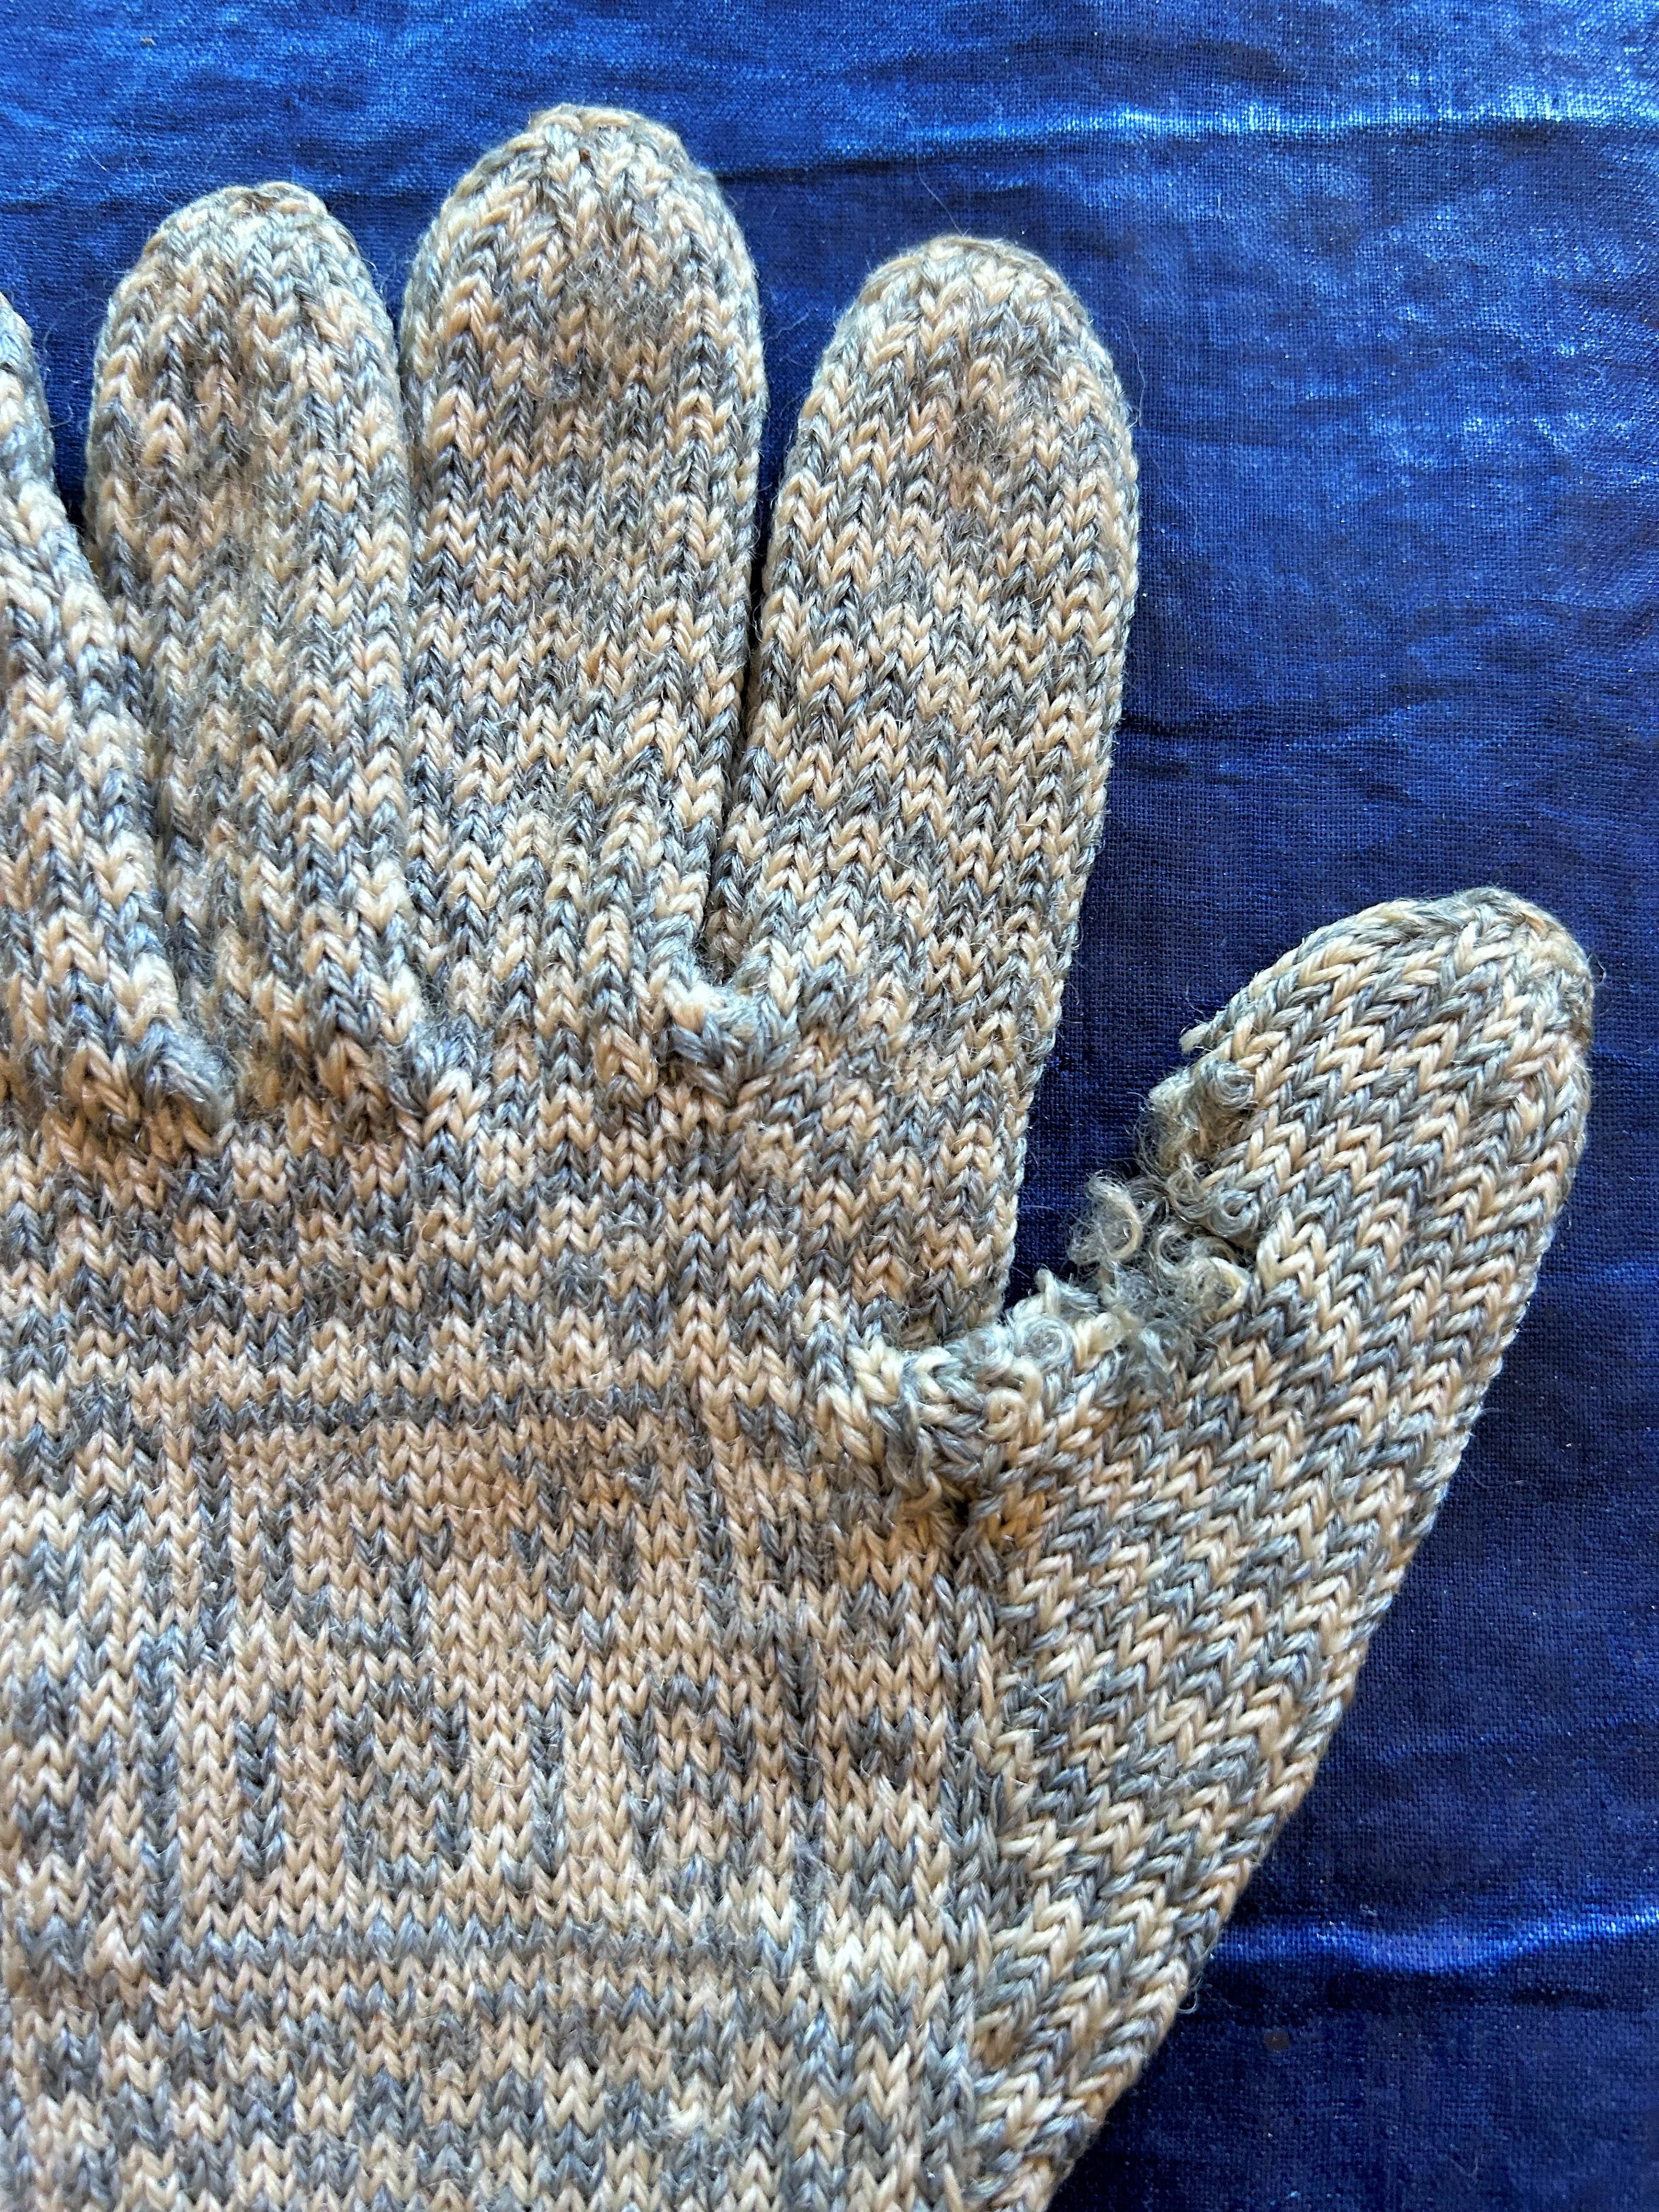 A pair of Sanquhar wool knitted gloves near Dumfries dated 1818 - Scotland 2